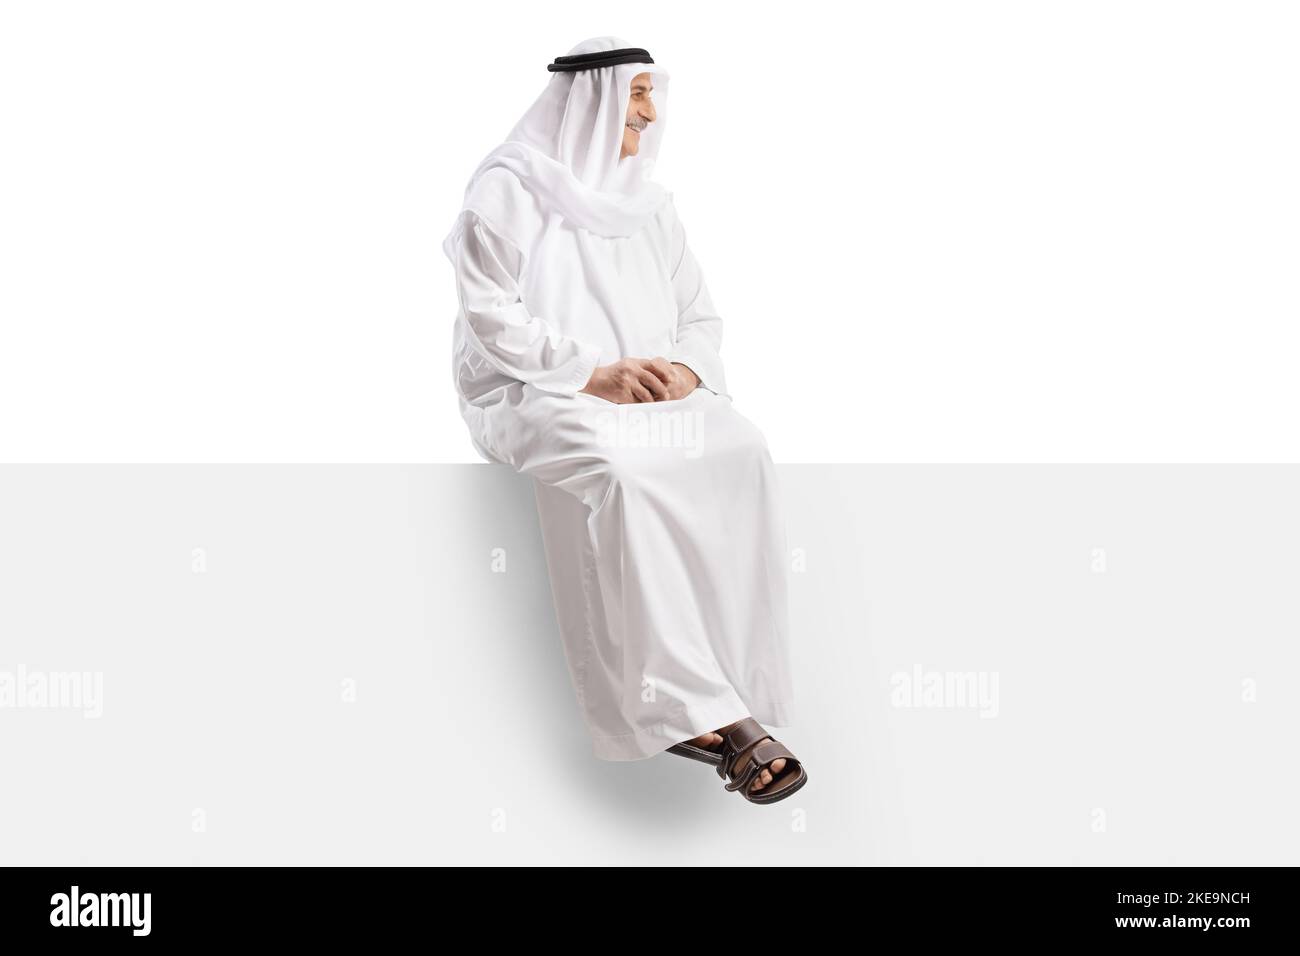 Arab man in an ethnic robe sitting on a blank panel and looking to the side isolated on white background Stock Photo